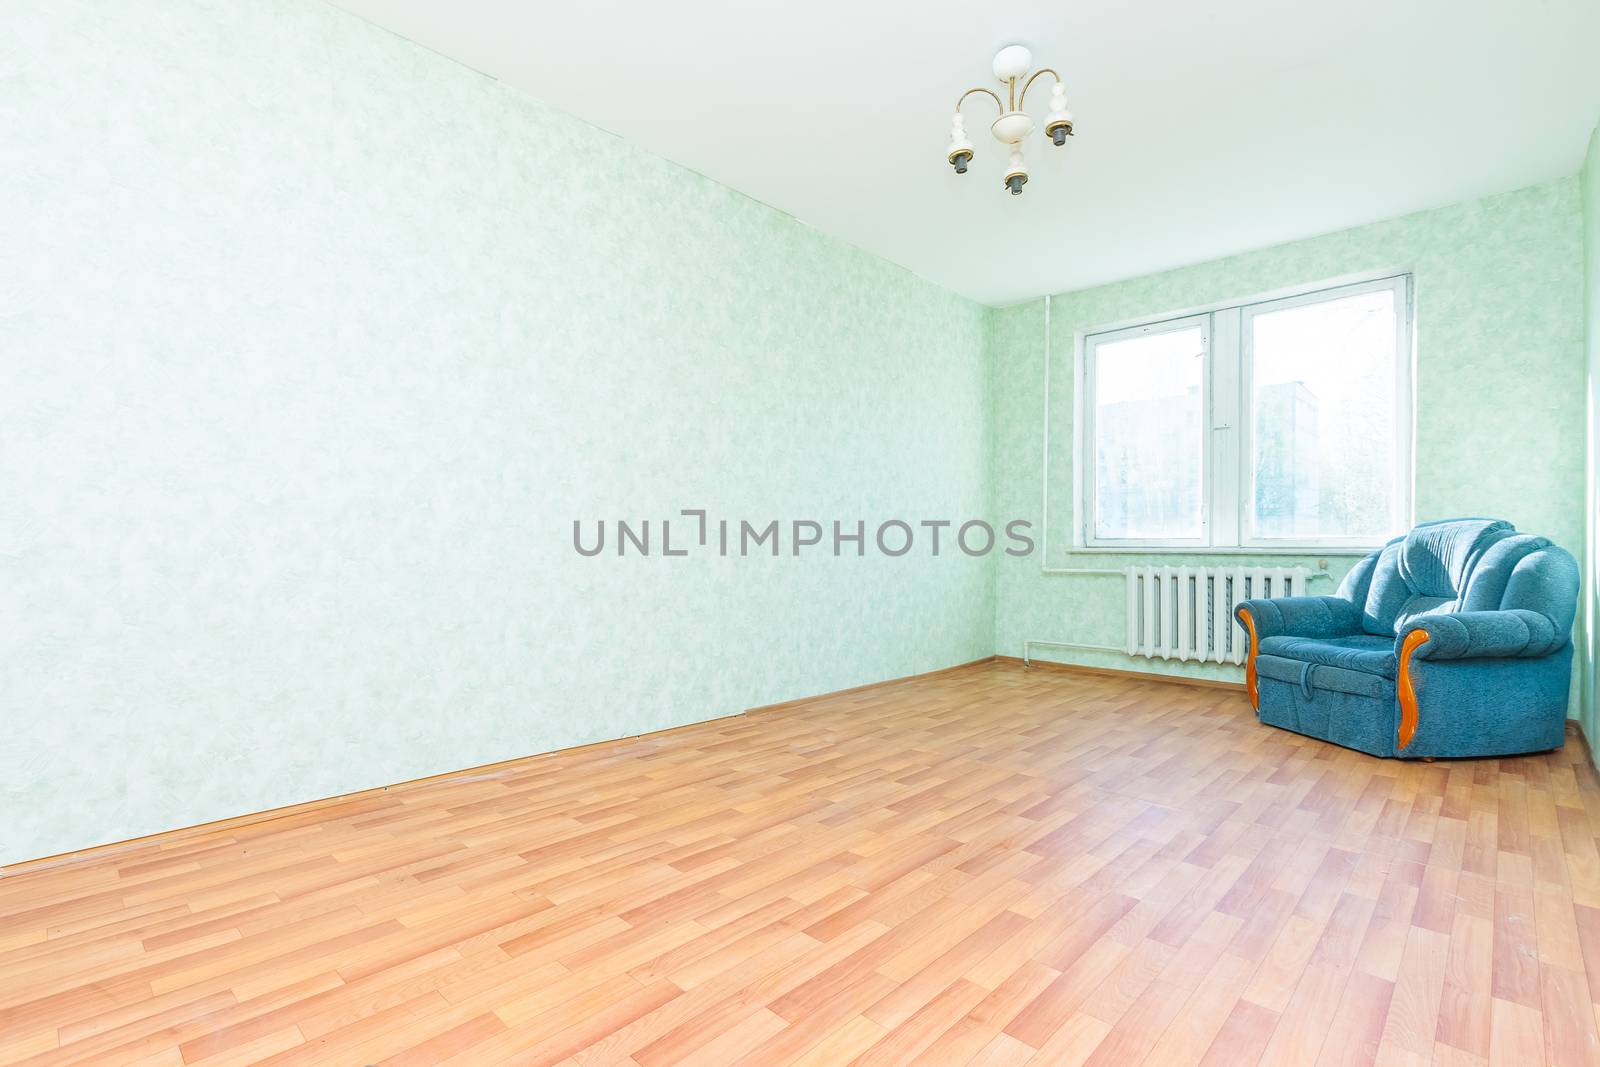 empty room after repair light clean interior with wallpaper